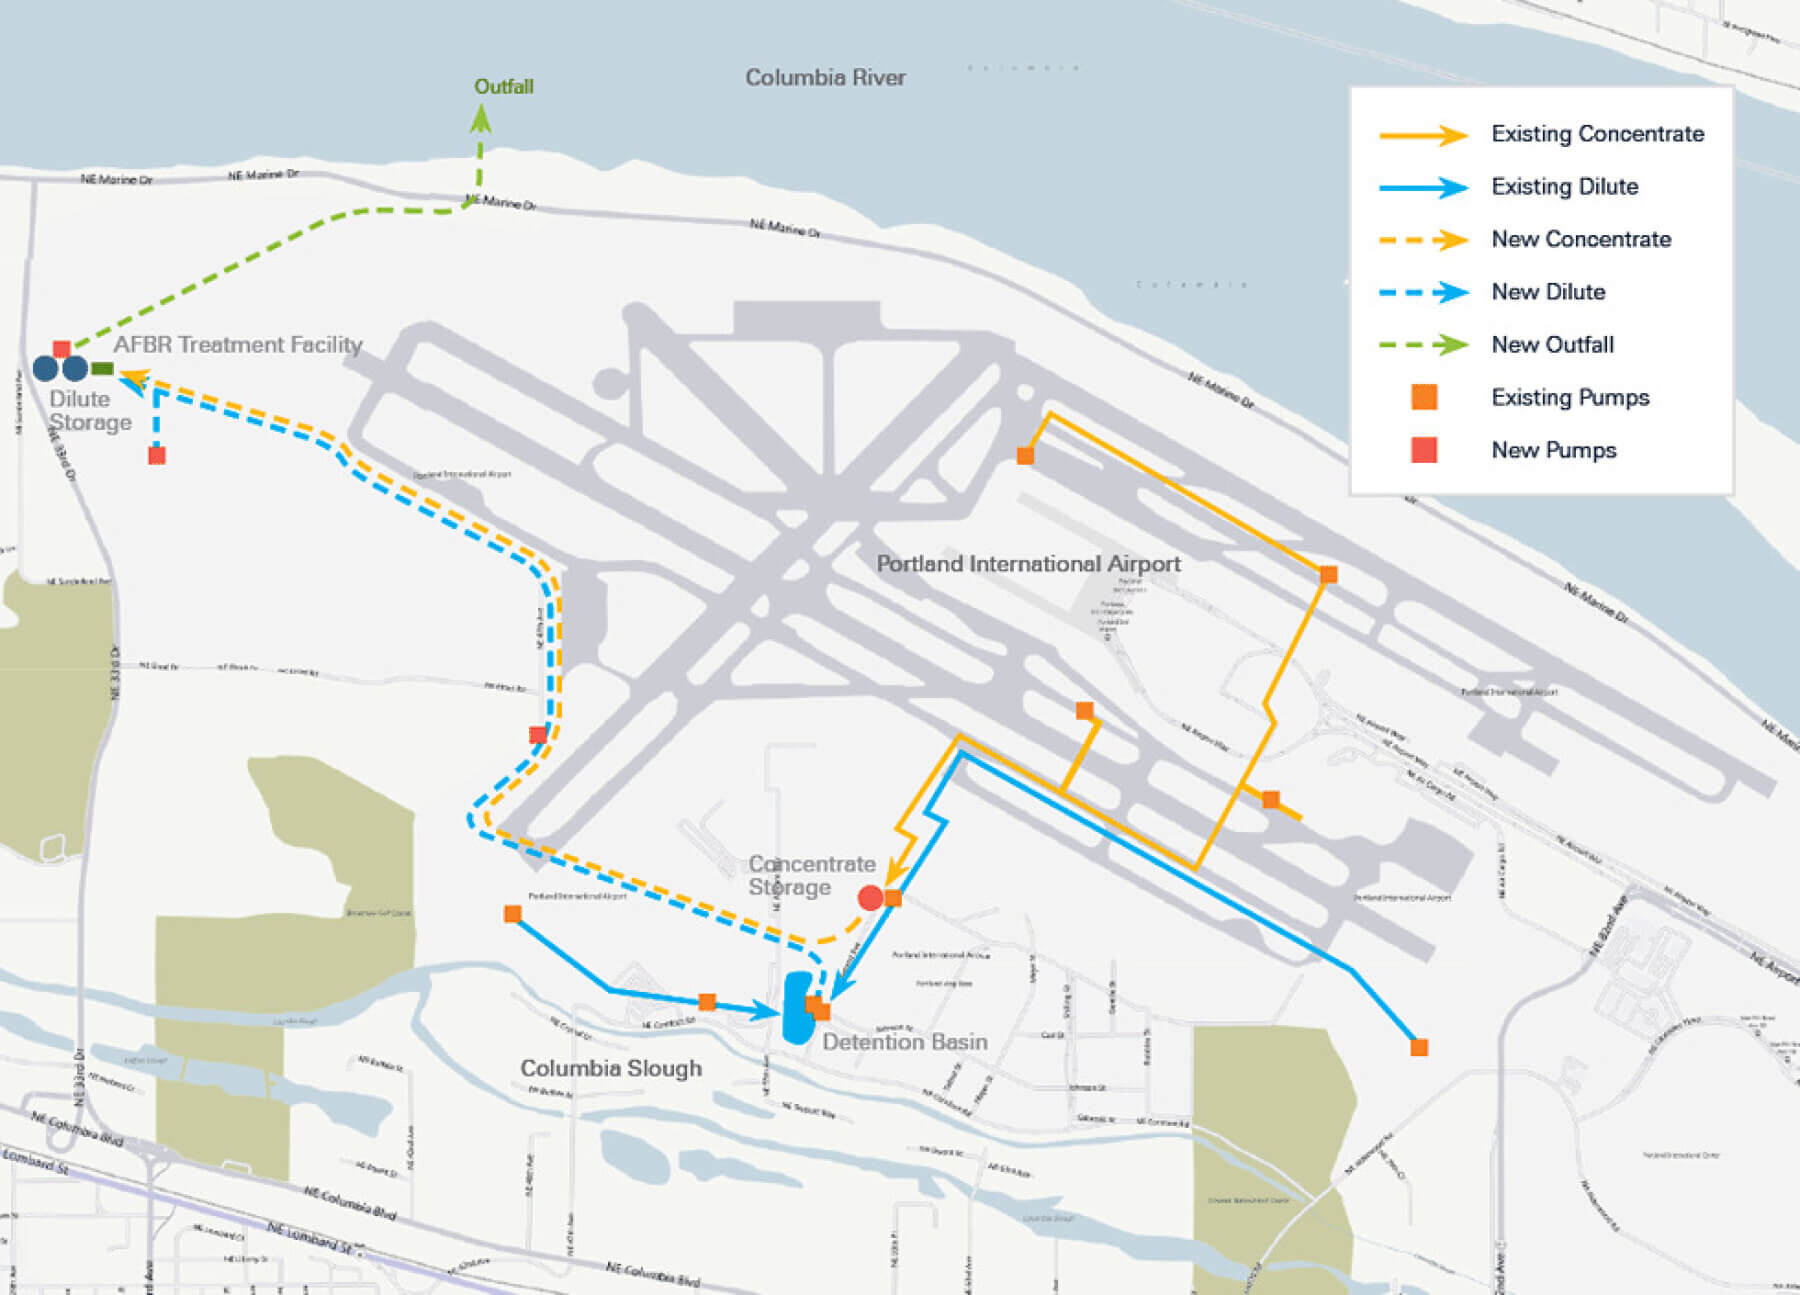 a map illustrating how the deicer management system conveyance maneuvers through the Portland International Airport site